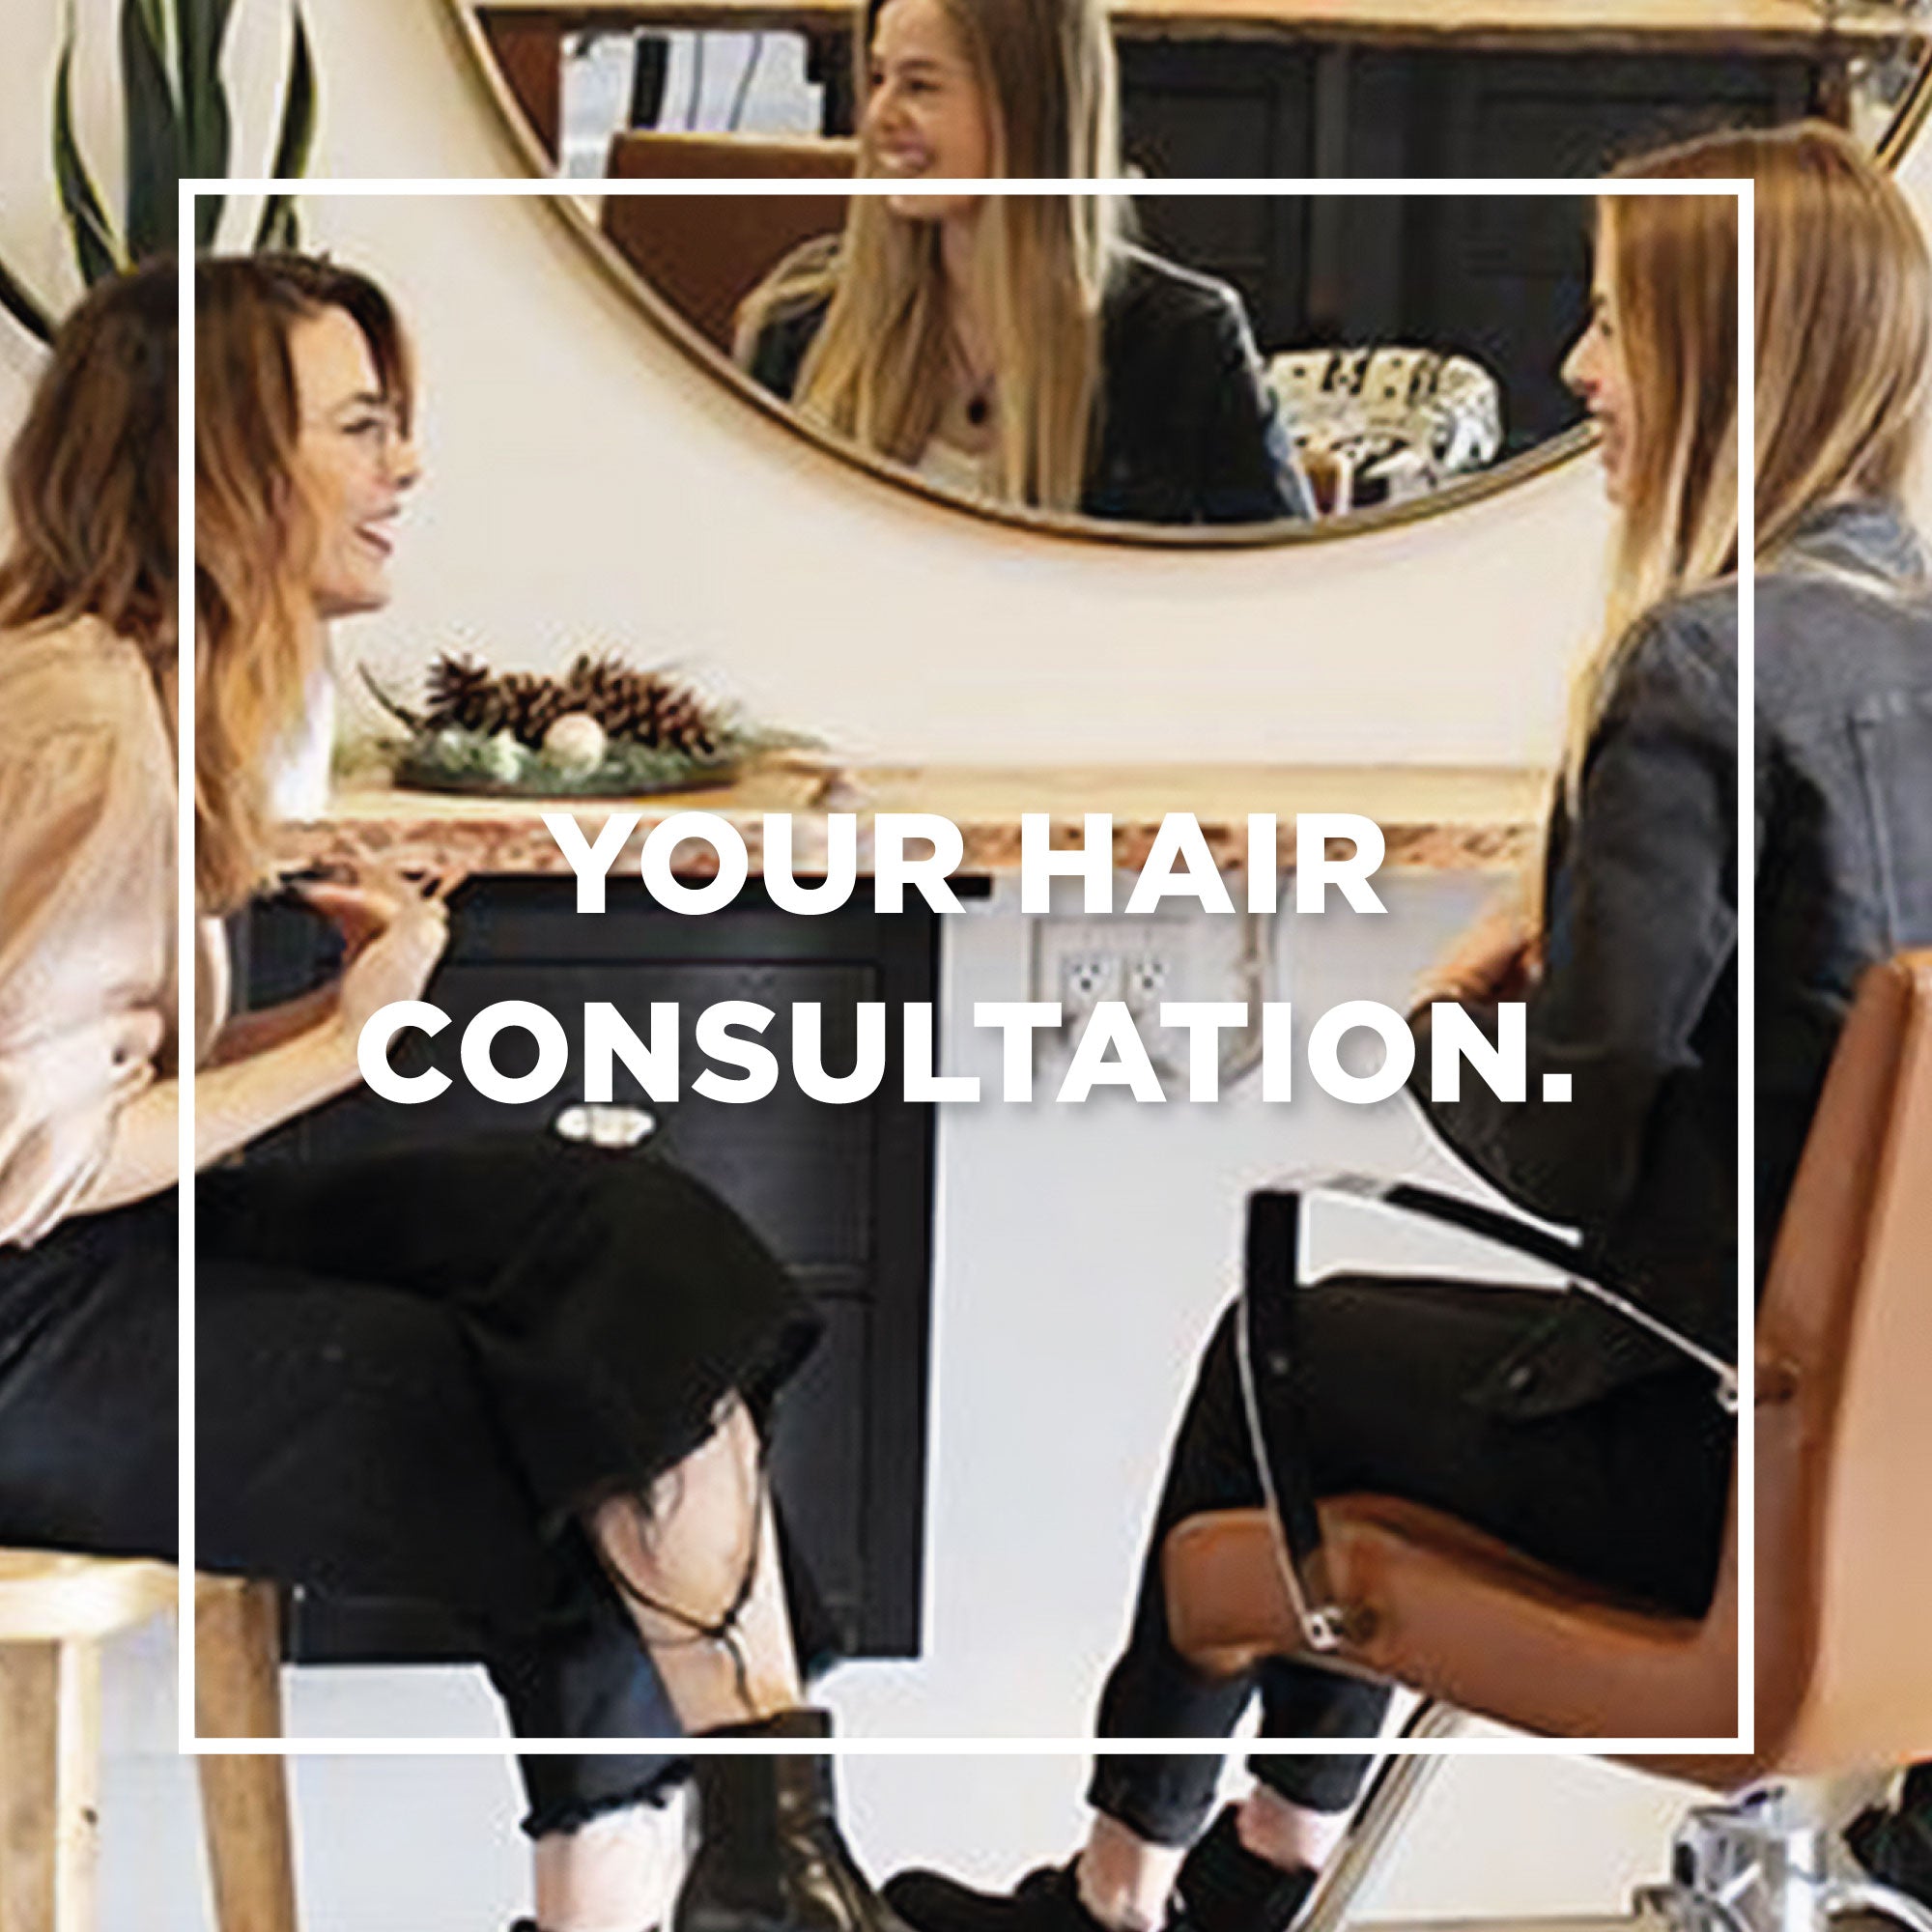 Why you do really need a hair consultation